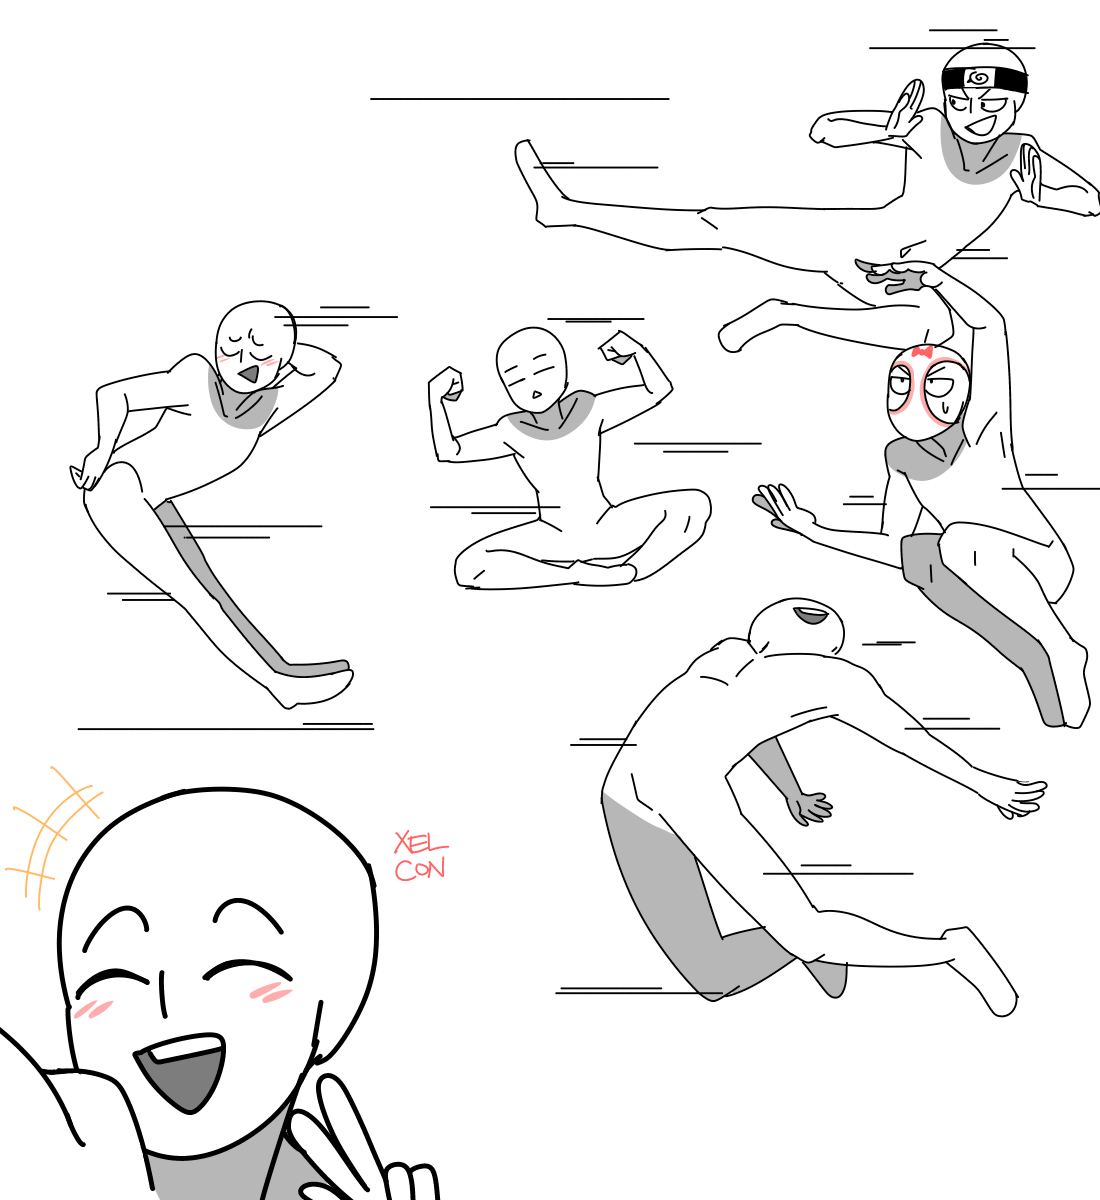 draw-the-squad-meme-template-2